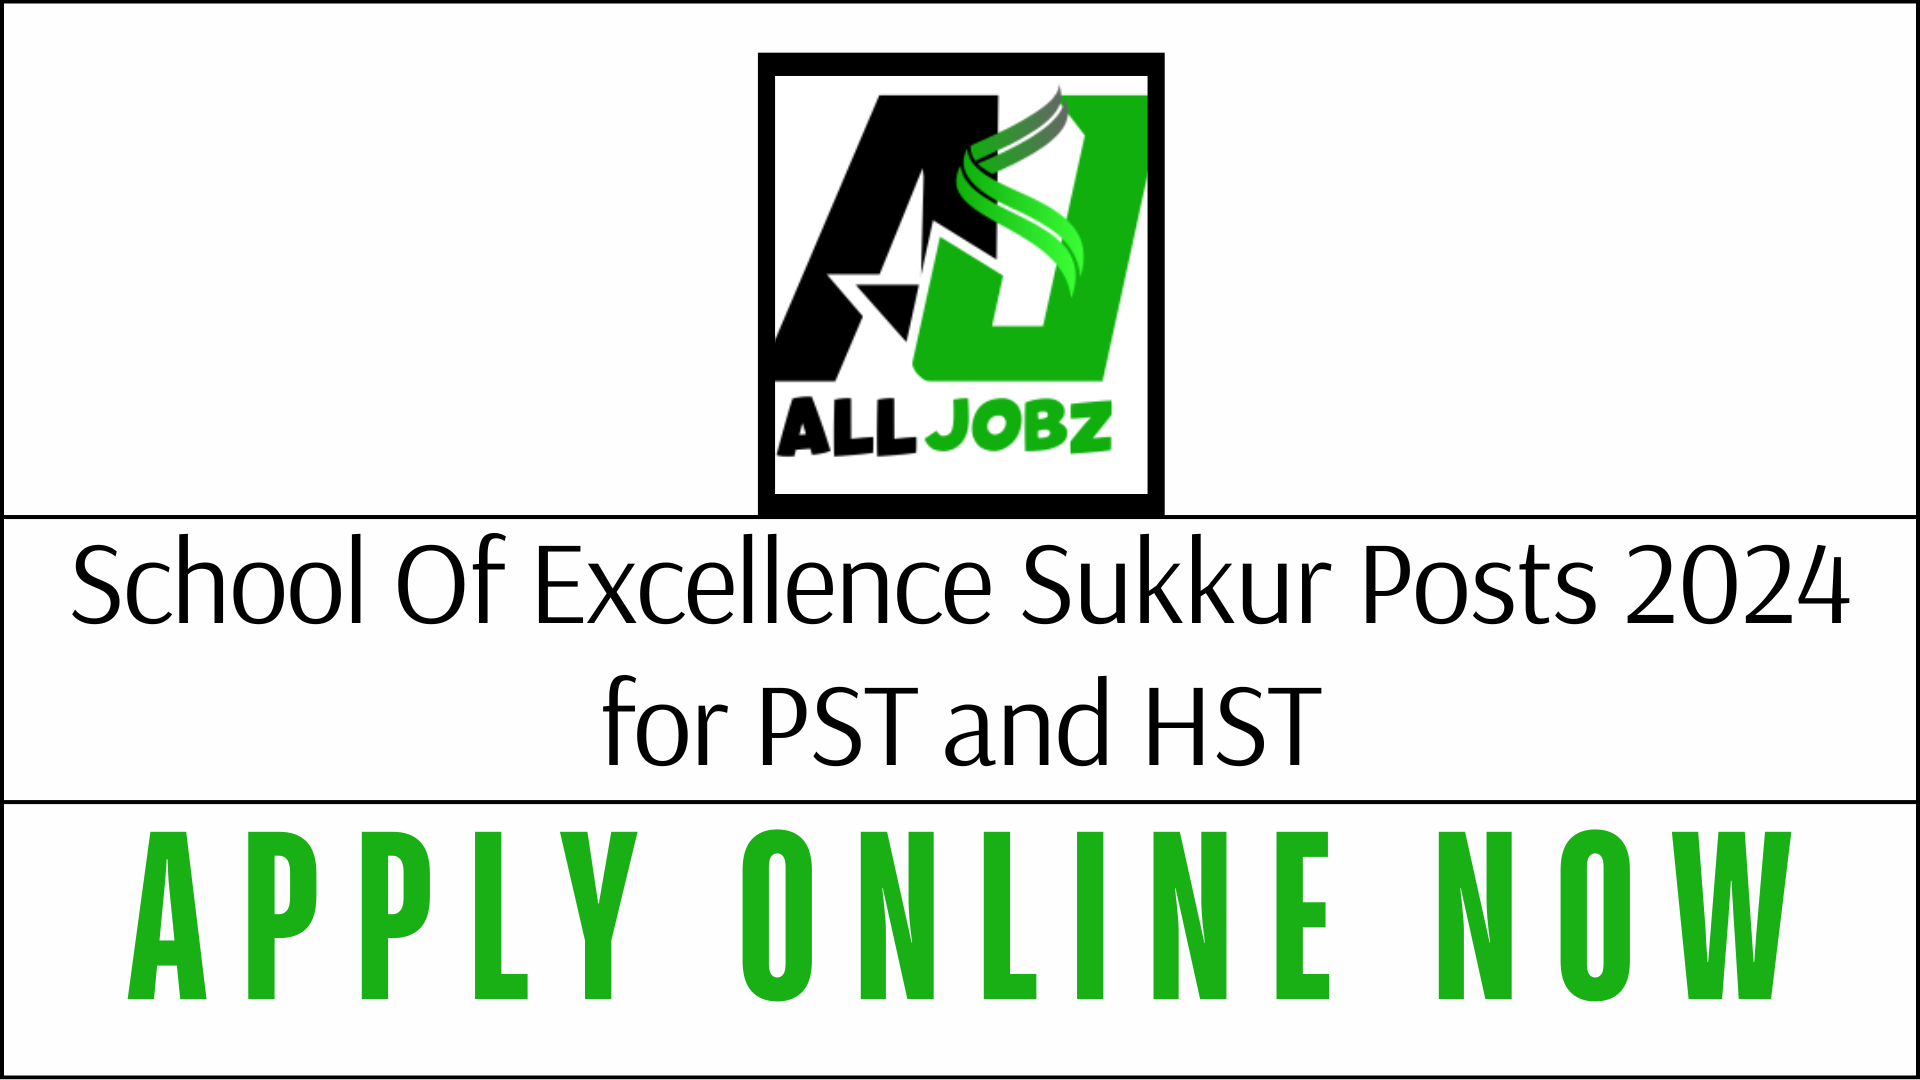 The School Of Excellence Sukkur Posts For Pst And Hst 2024 Is Calling On Dynamic, Qualified, Energetic, Punctual, Sincere, And Dedicated Candidates To Join Their Team For Various Positions In The Boys/Girls Higher Secondary Classes, Junior, And Montessori Branches. School Of Excellence Sukkur Jobs Online Apply, School Of Excellence Sukkur Jobs For Teachers, School Of Excellence Jobs. If You Have A Passion For Education And The Required Qualifications, This Is Your Chance To Be Part Of An Esteemed Institution. School Of Excellence Sukkur Posts For Pst And Hst, School Of Excellence Sukkur Jobs Online Apply, School Of Excellence Sukkur Jobs For Teachers, School Of Excellence Jobs, Edzone School System Sukkur, The School Of Excellence, School Of Excellence Results 2024, School Of Excellence Sukkur Jobs 2024 Result, School Of Excellence Sukkur Jobs 2024 Last Date, School Of Excellence Sukkur Jobs 2024 For Teachers,